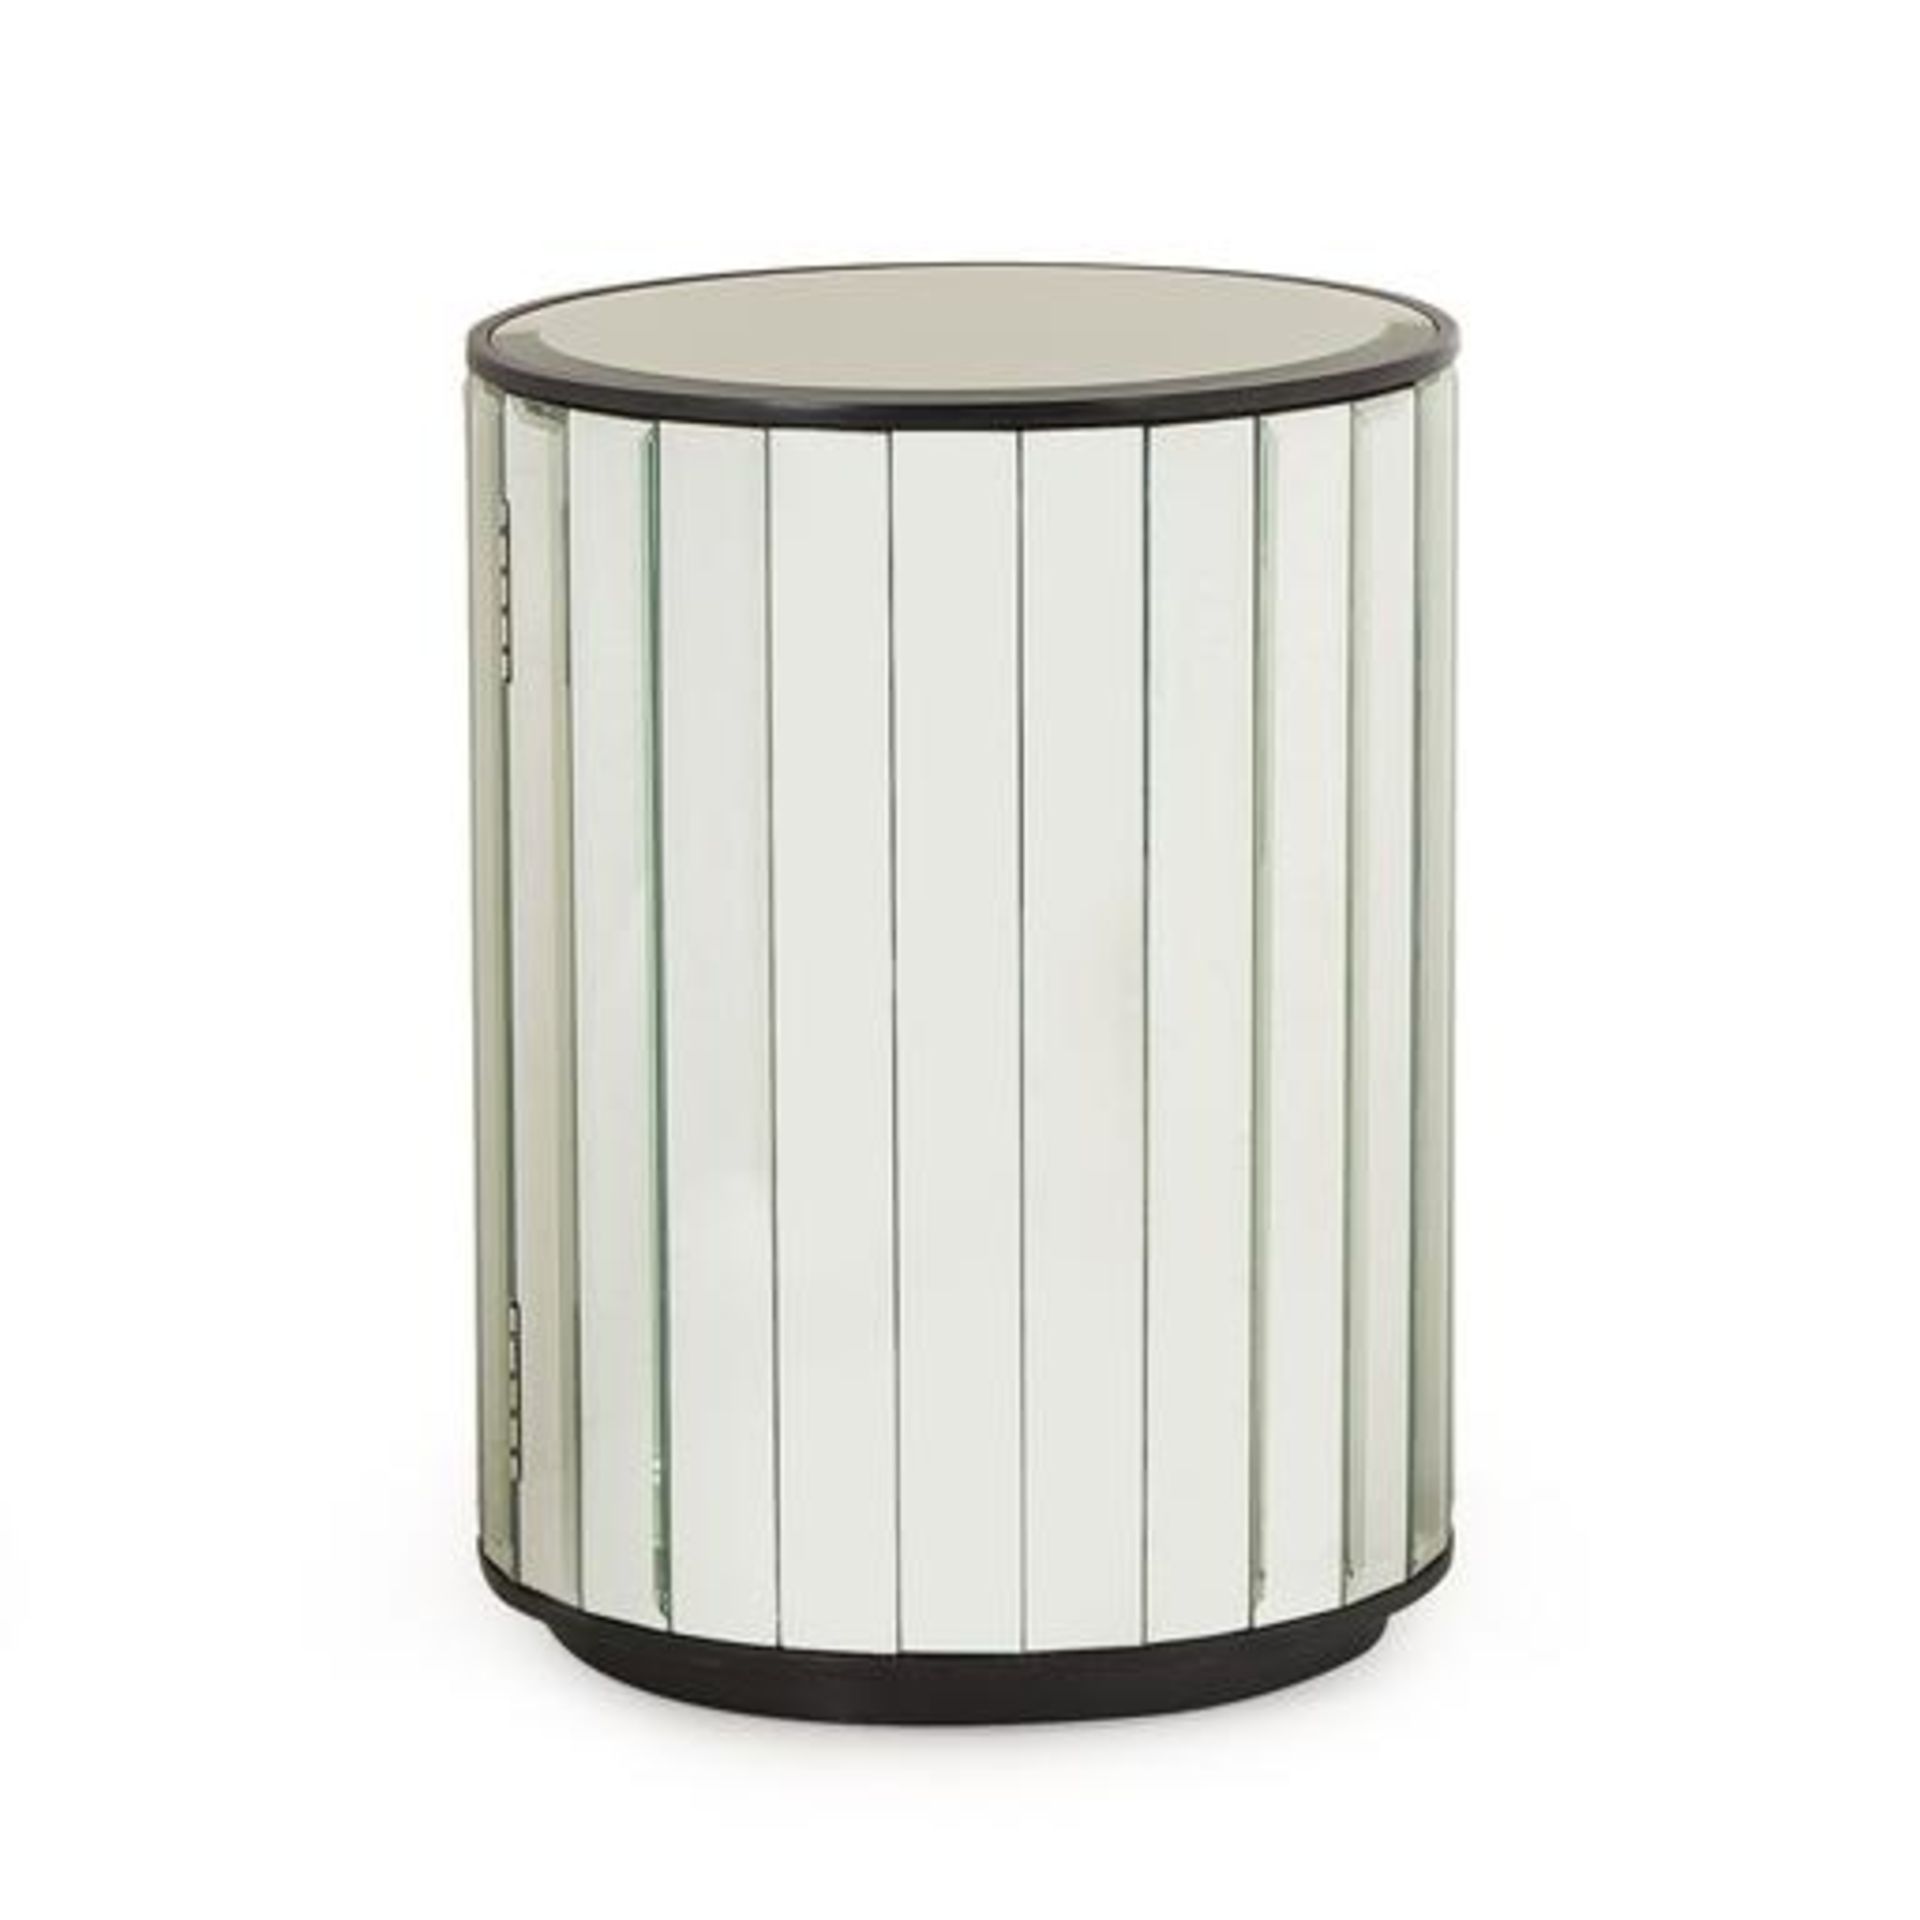 Simone Mirrored Side Table Sleek And Shapely, This Eye-Catching Side Table Features Mirrored Glass